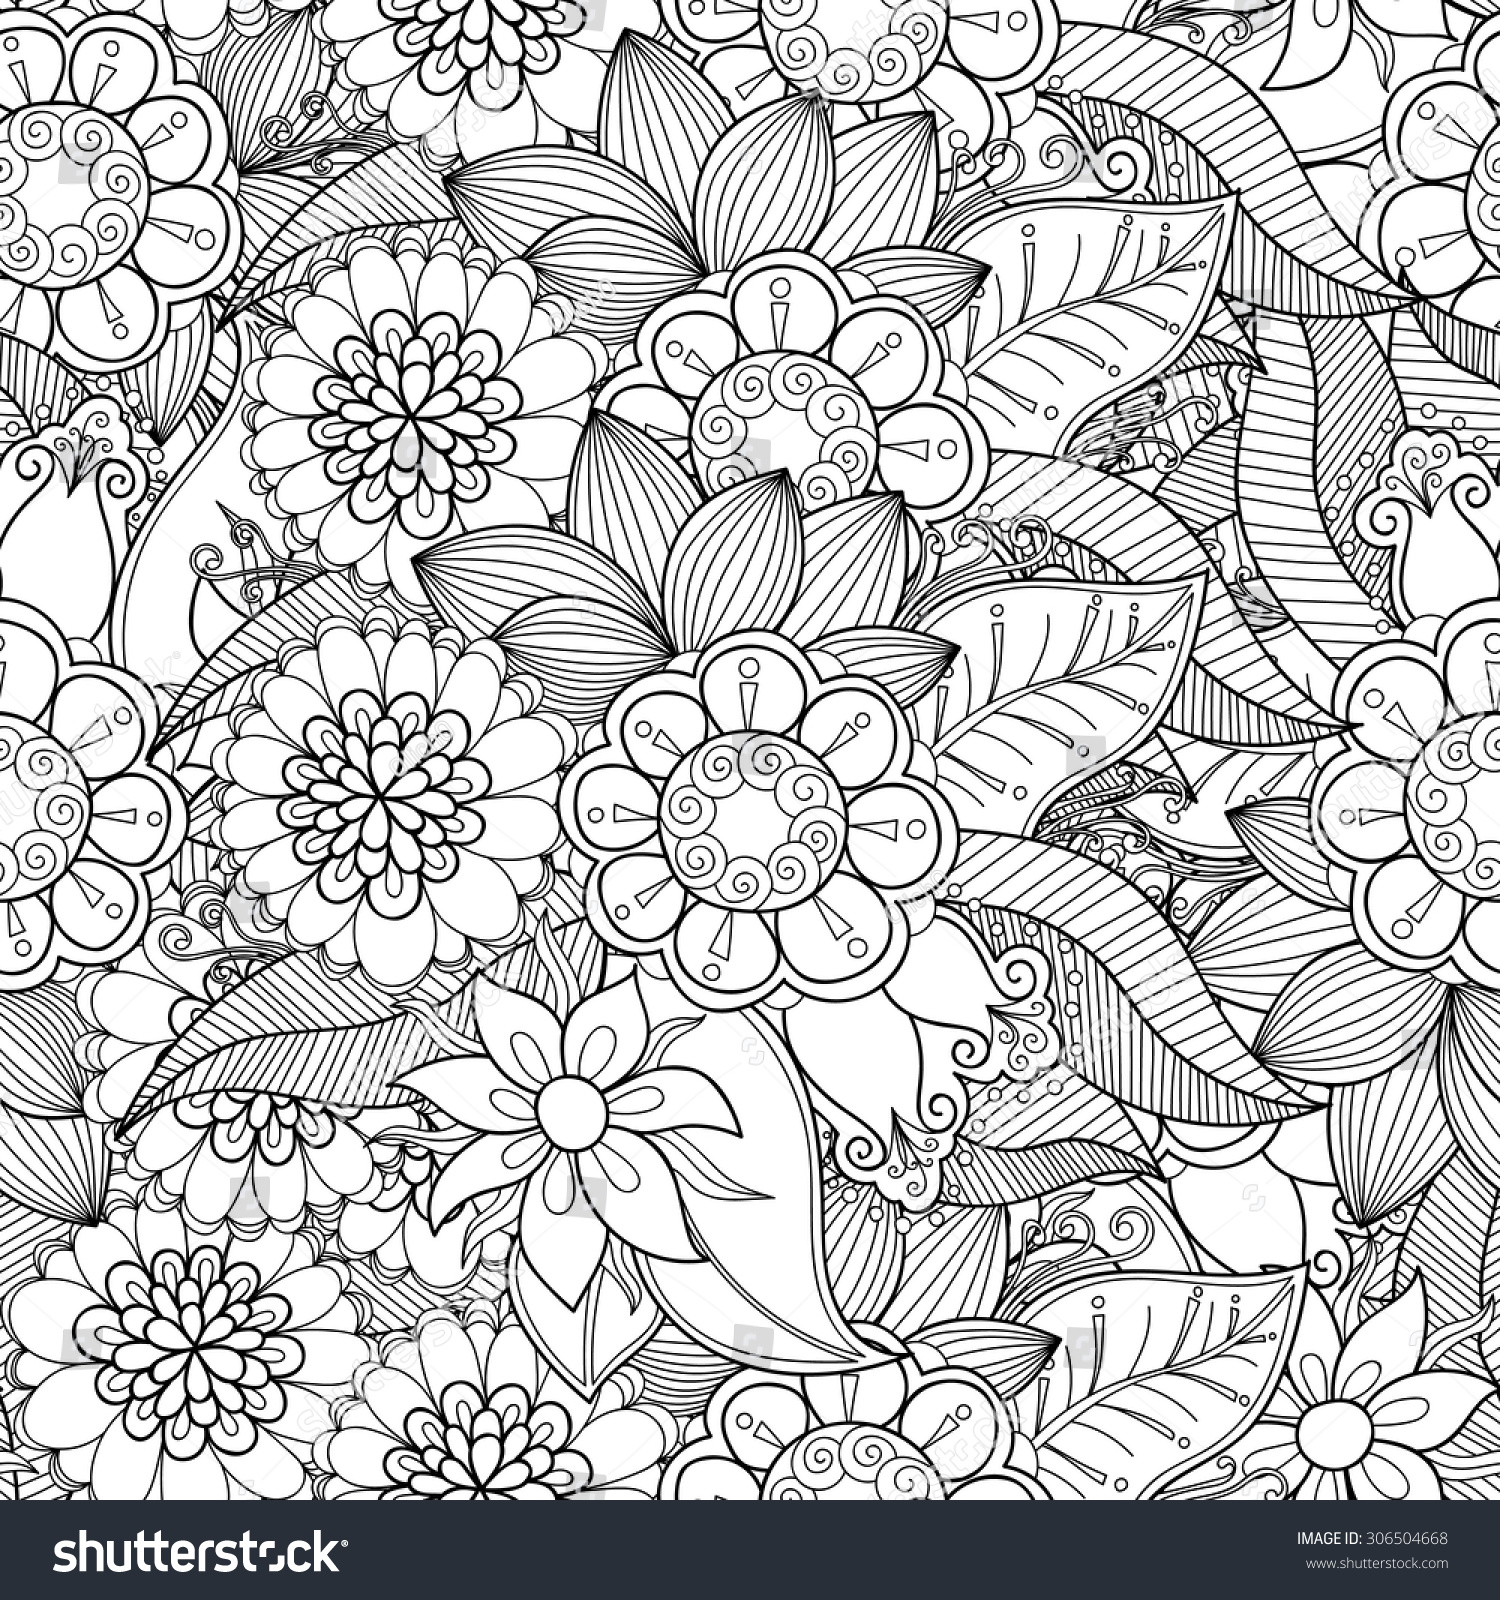 Floral Handdrawn Seamless Pattern Doodle Vector Stock Vector (Royalty ...